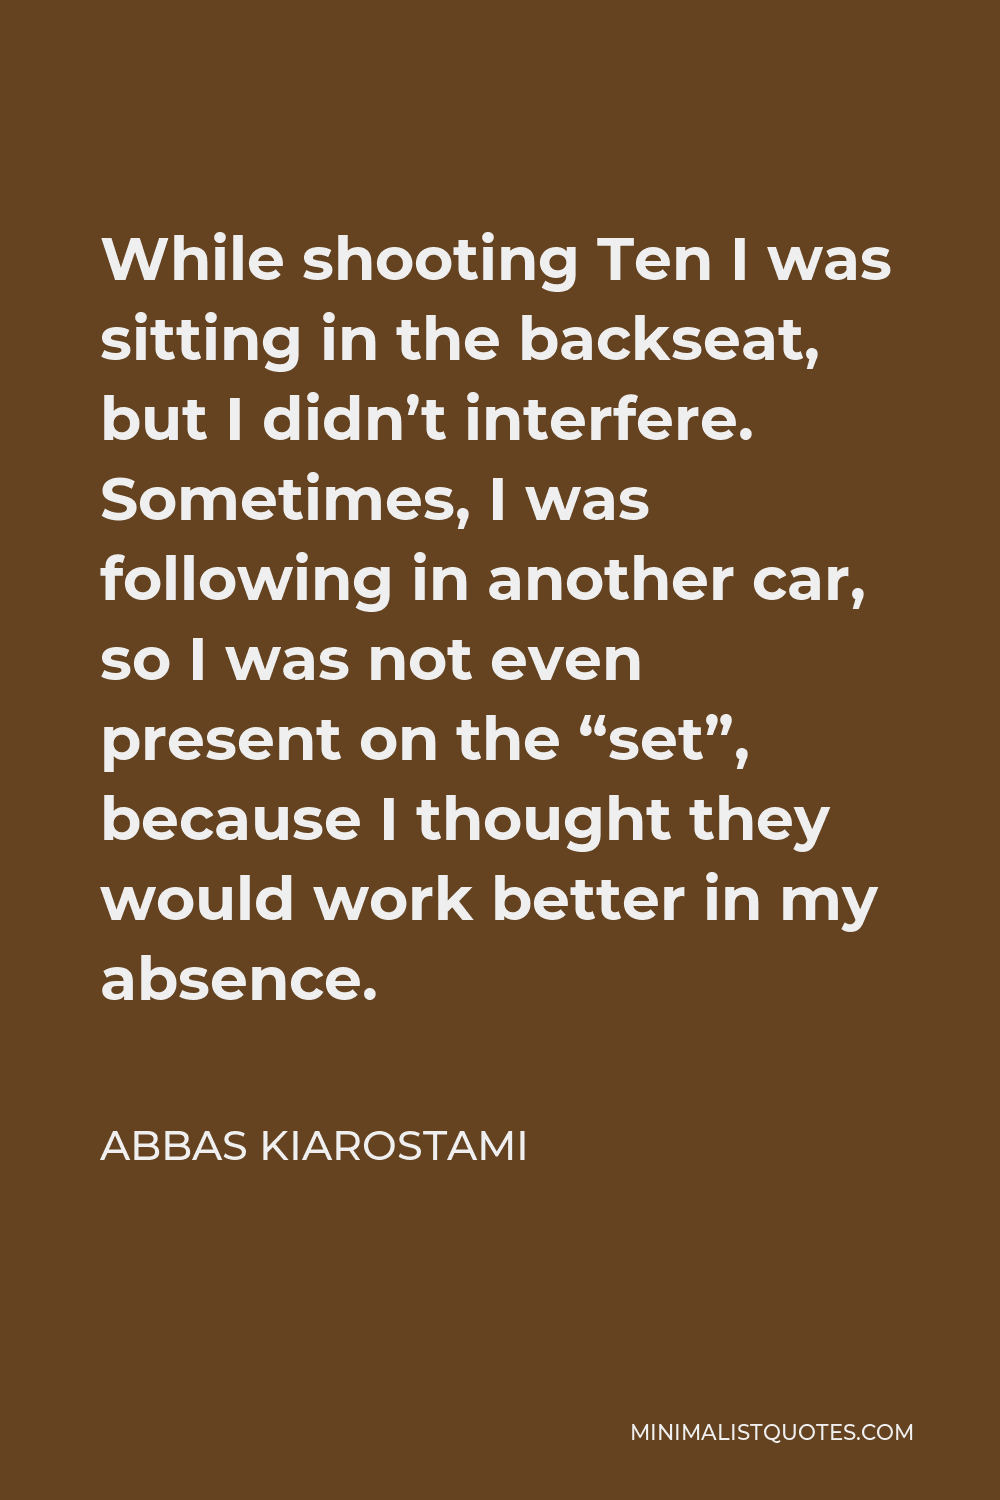 Abbas Kiarostami Quote - While shooting Ten I was sitting in the backseat, but I didn’t interfere. Sometimes, I was following in another car, so I was not even present on the “set”, because I thought they would work better in my absence.